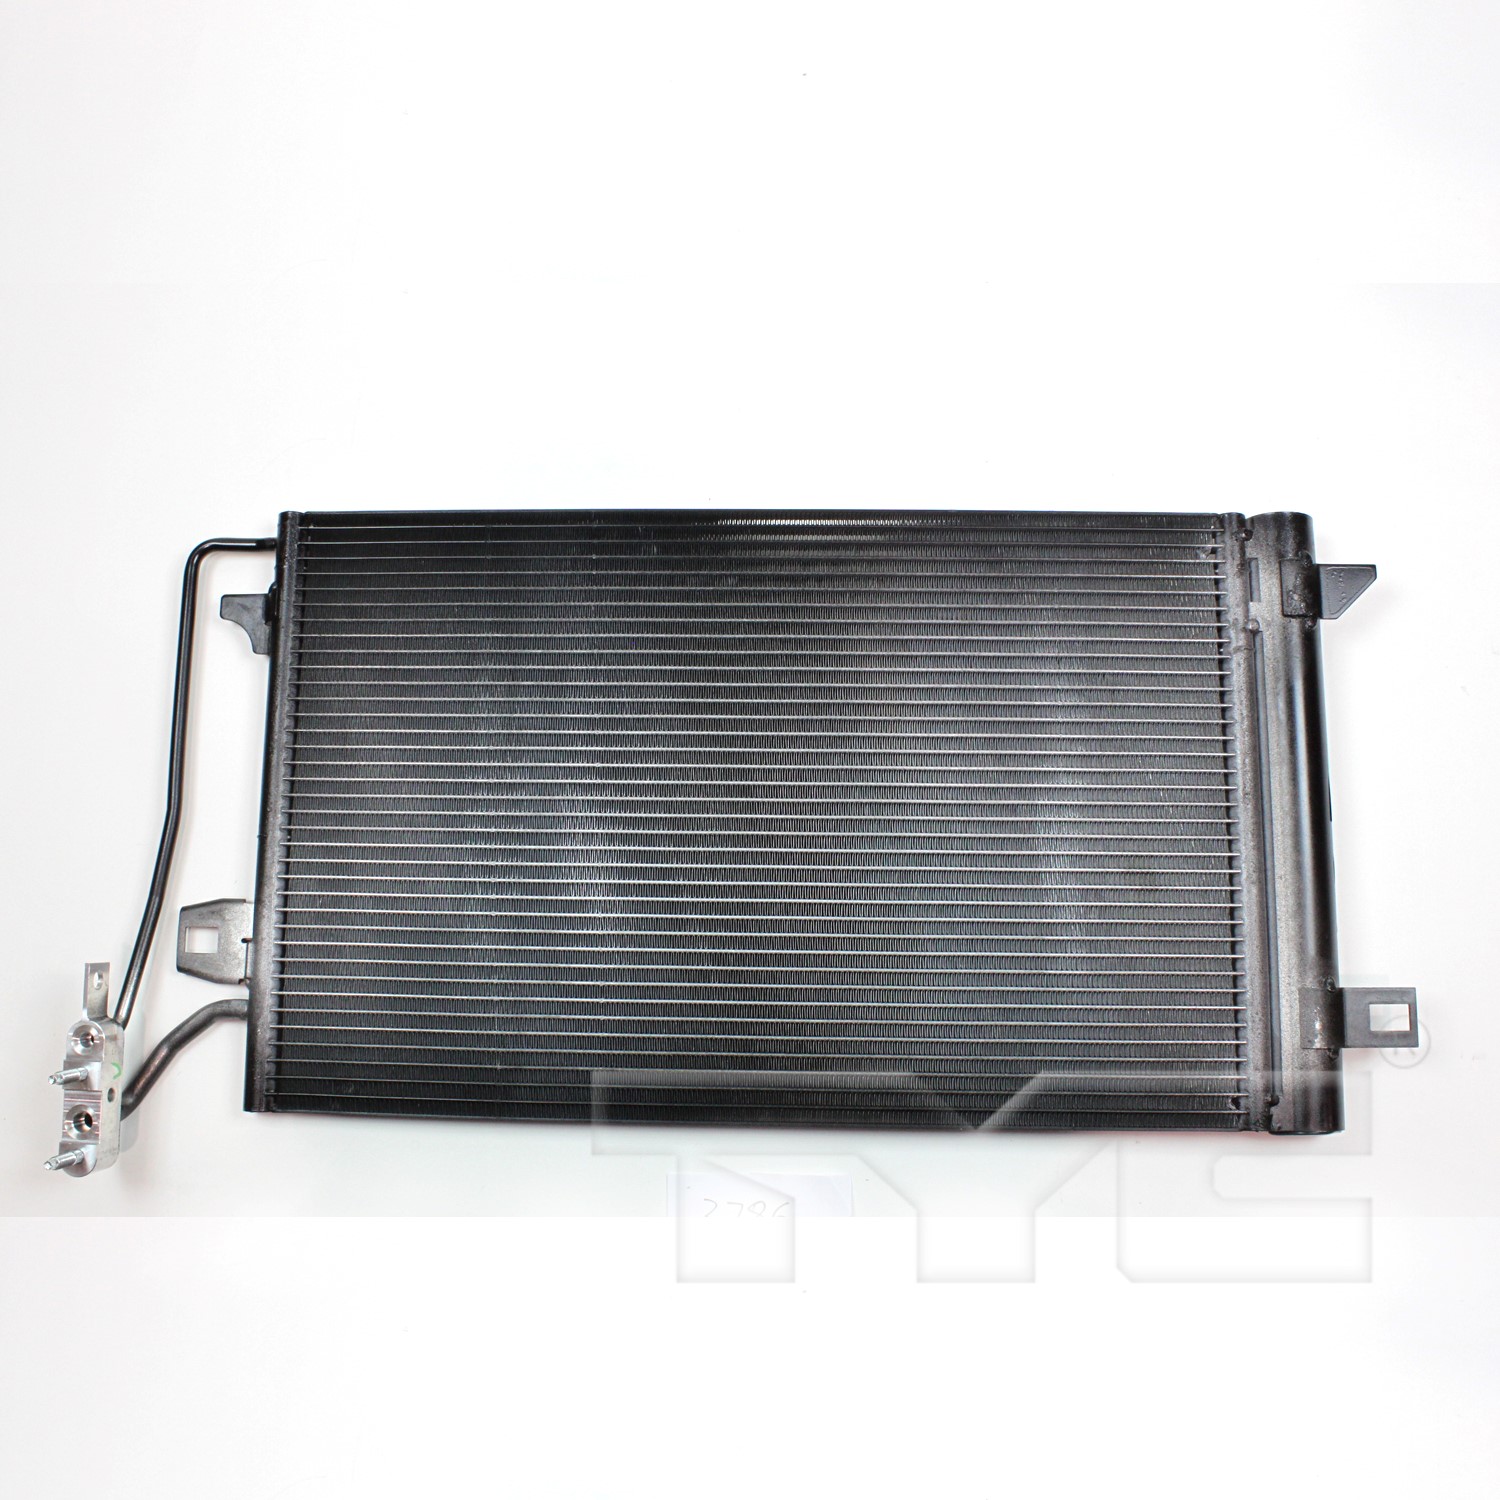 Aftermarket AC CONDENSERS for FORD - FUSION, FUSION,10-12,Air conditioning condenser